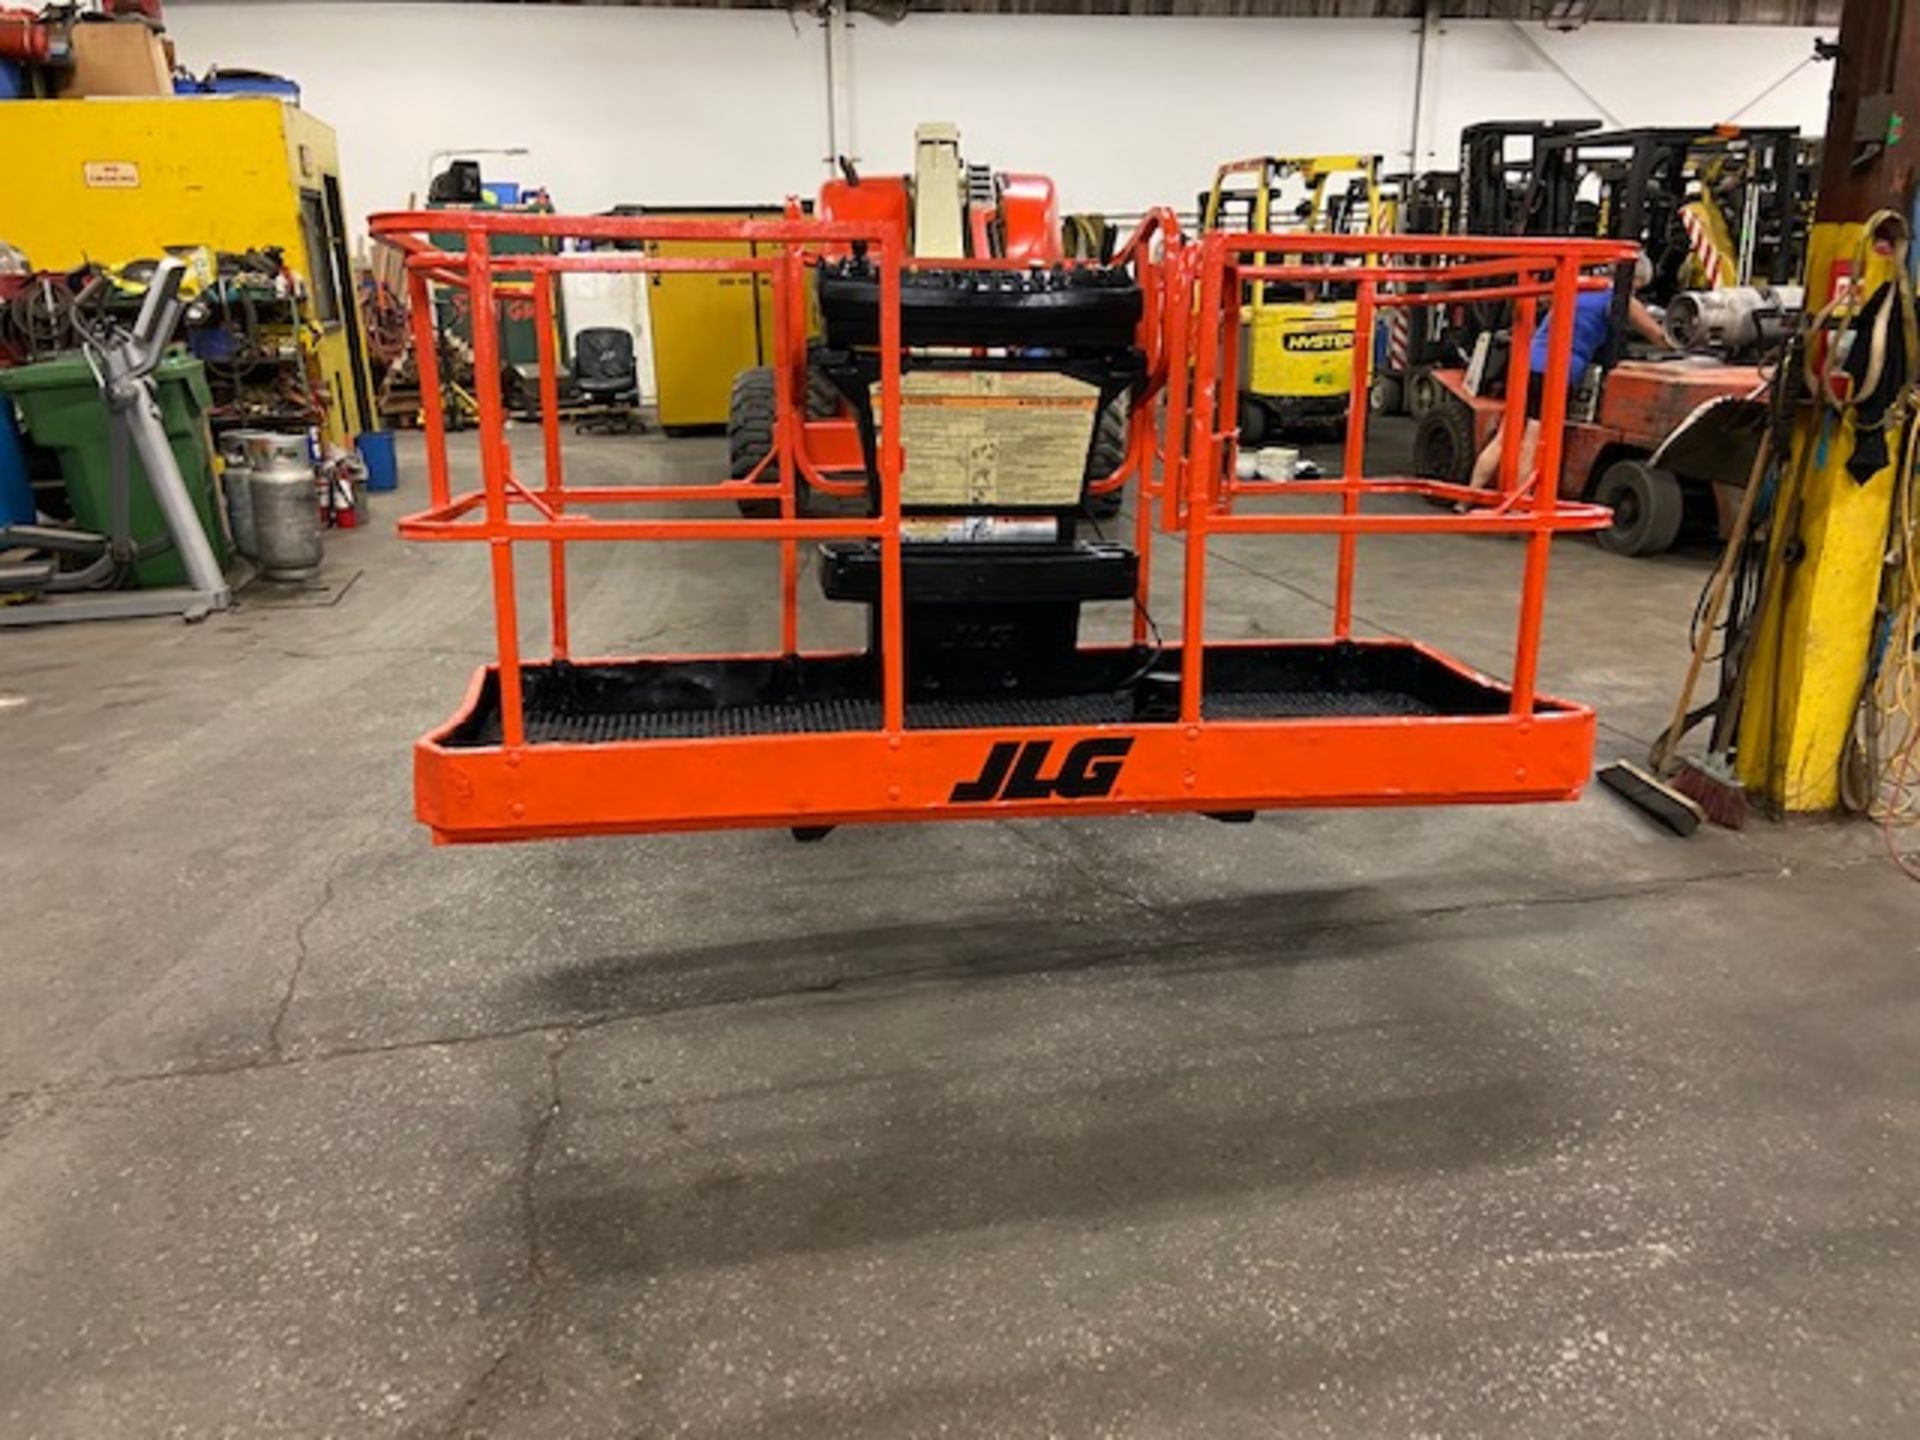 MINT JLG model 600S Boom Lift with 60' platform height with 4x4 NICE MACHINE with LOW hours - Image 3 of 5